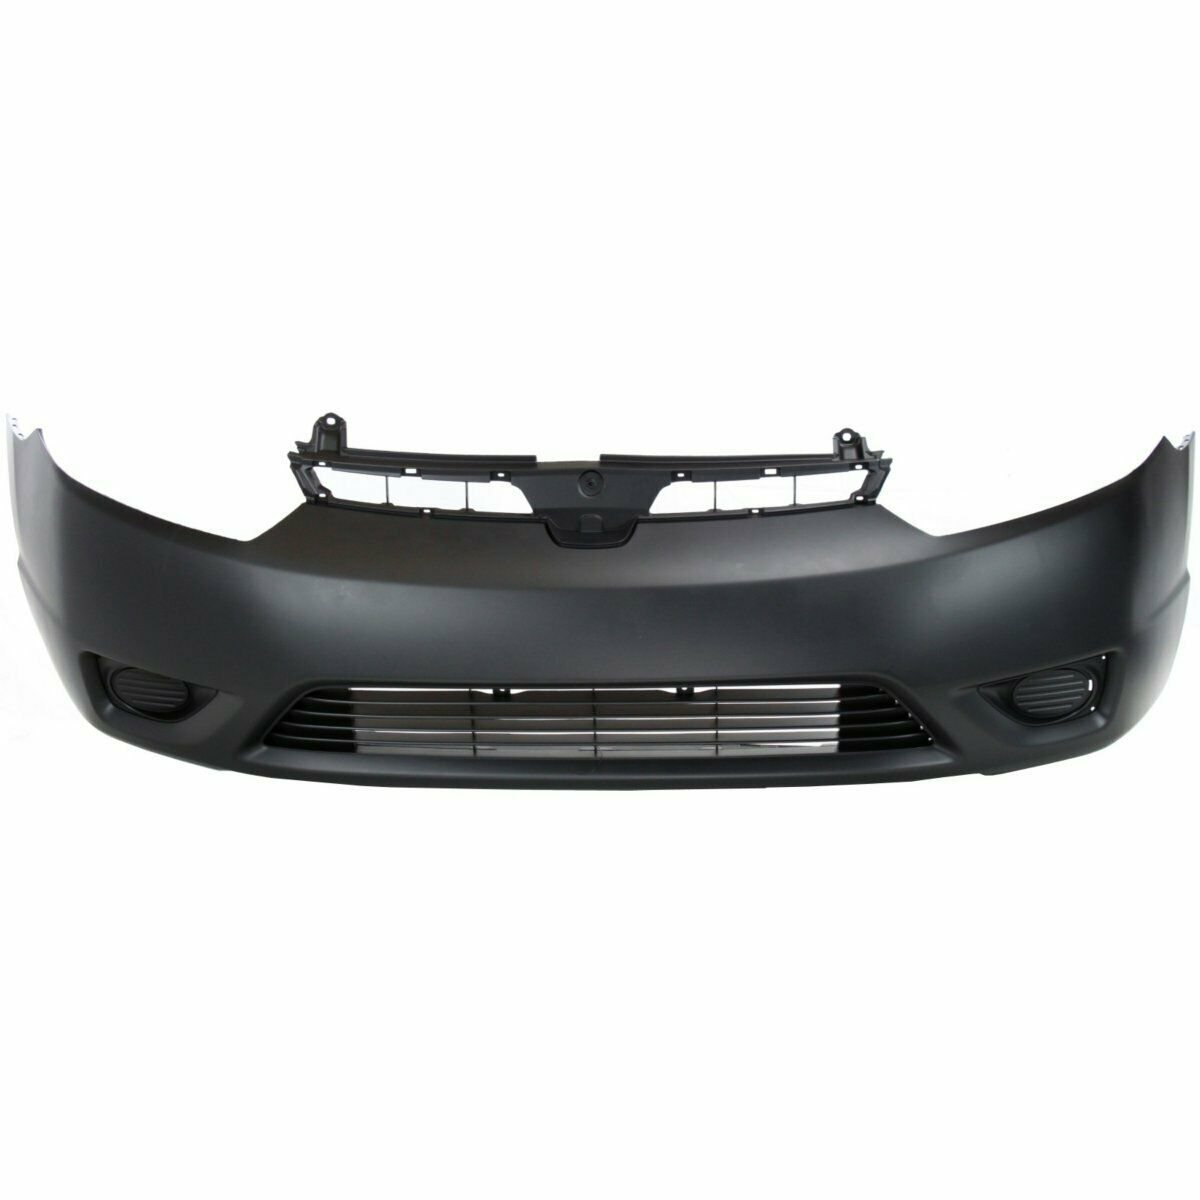 2006-2008 Honda Civic Coupe 1.8L Front Bumper Painted to Match